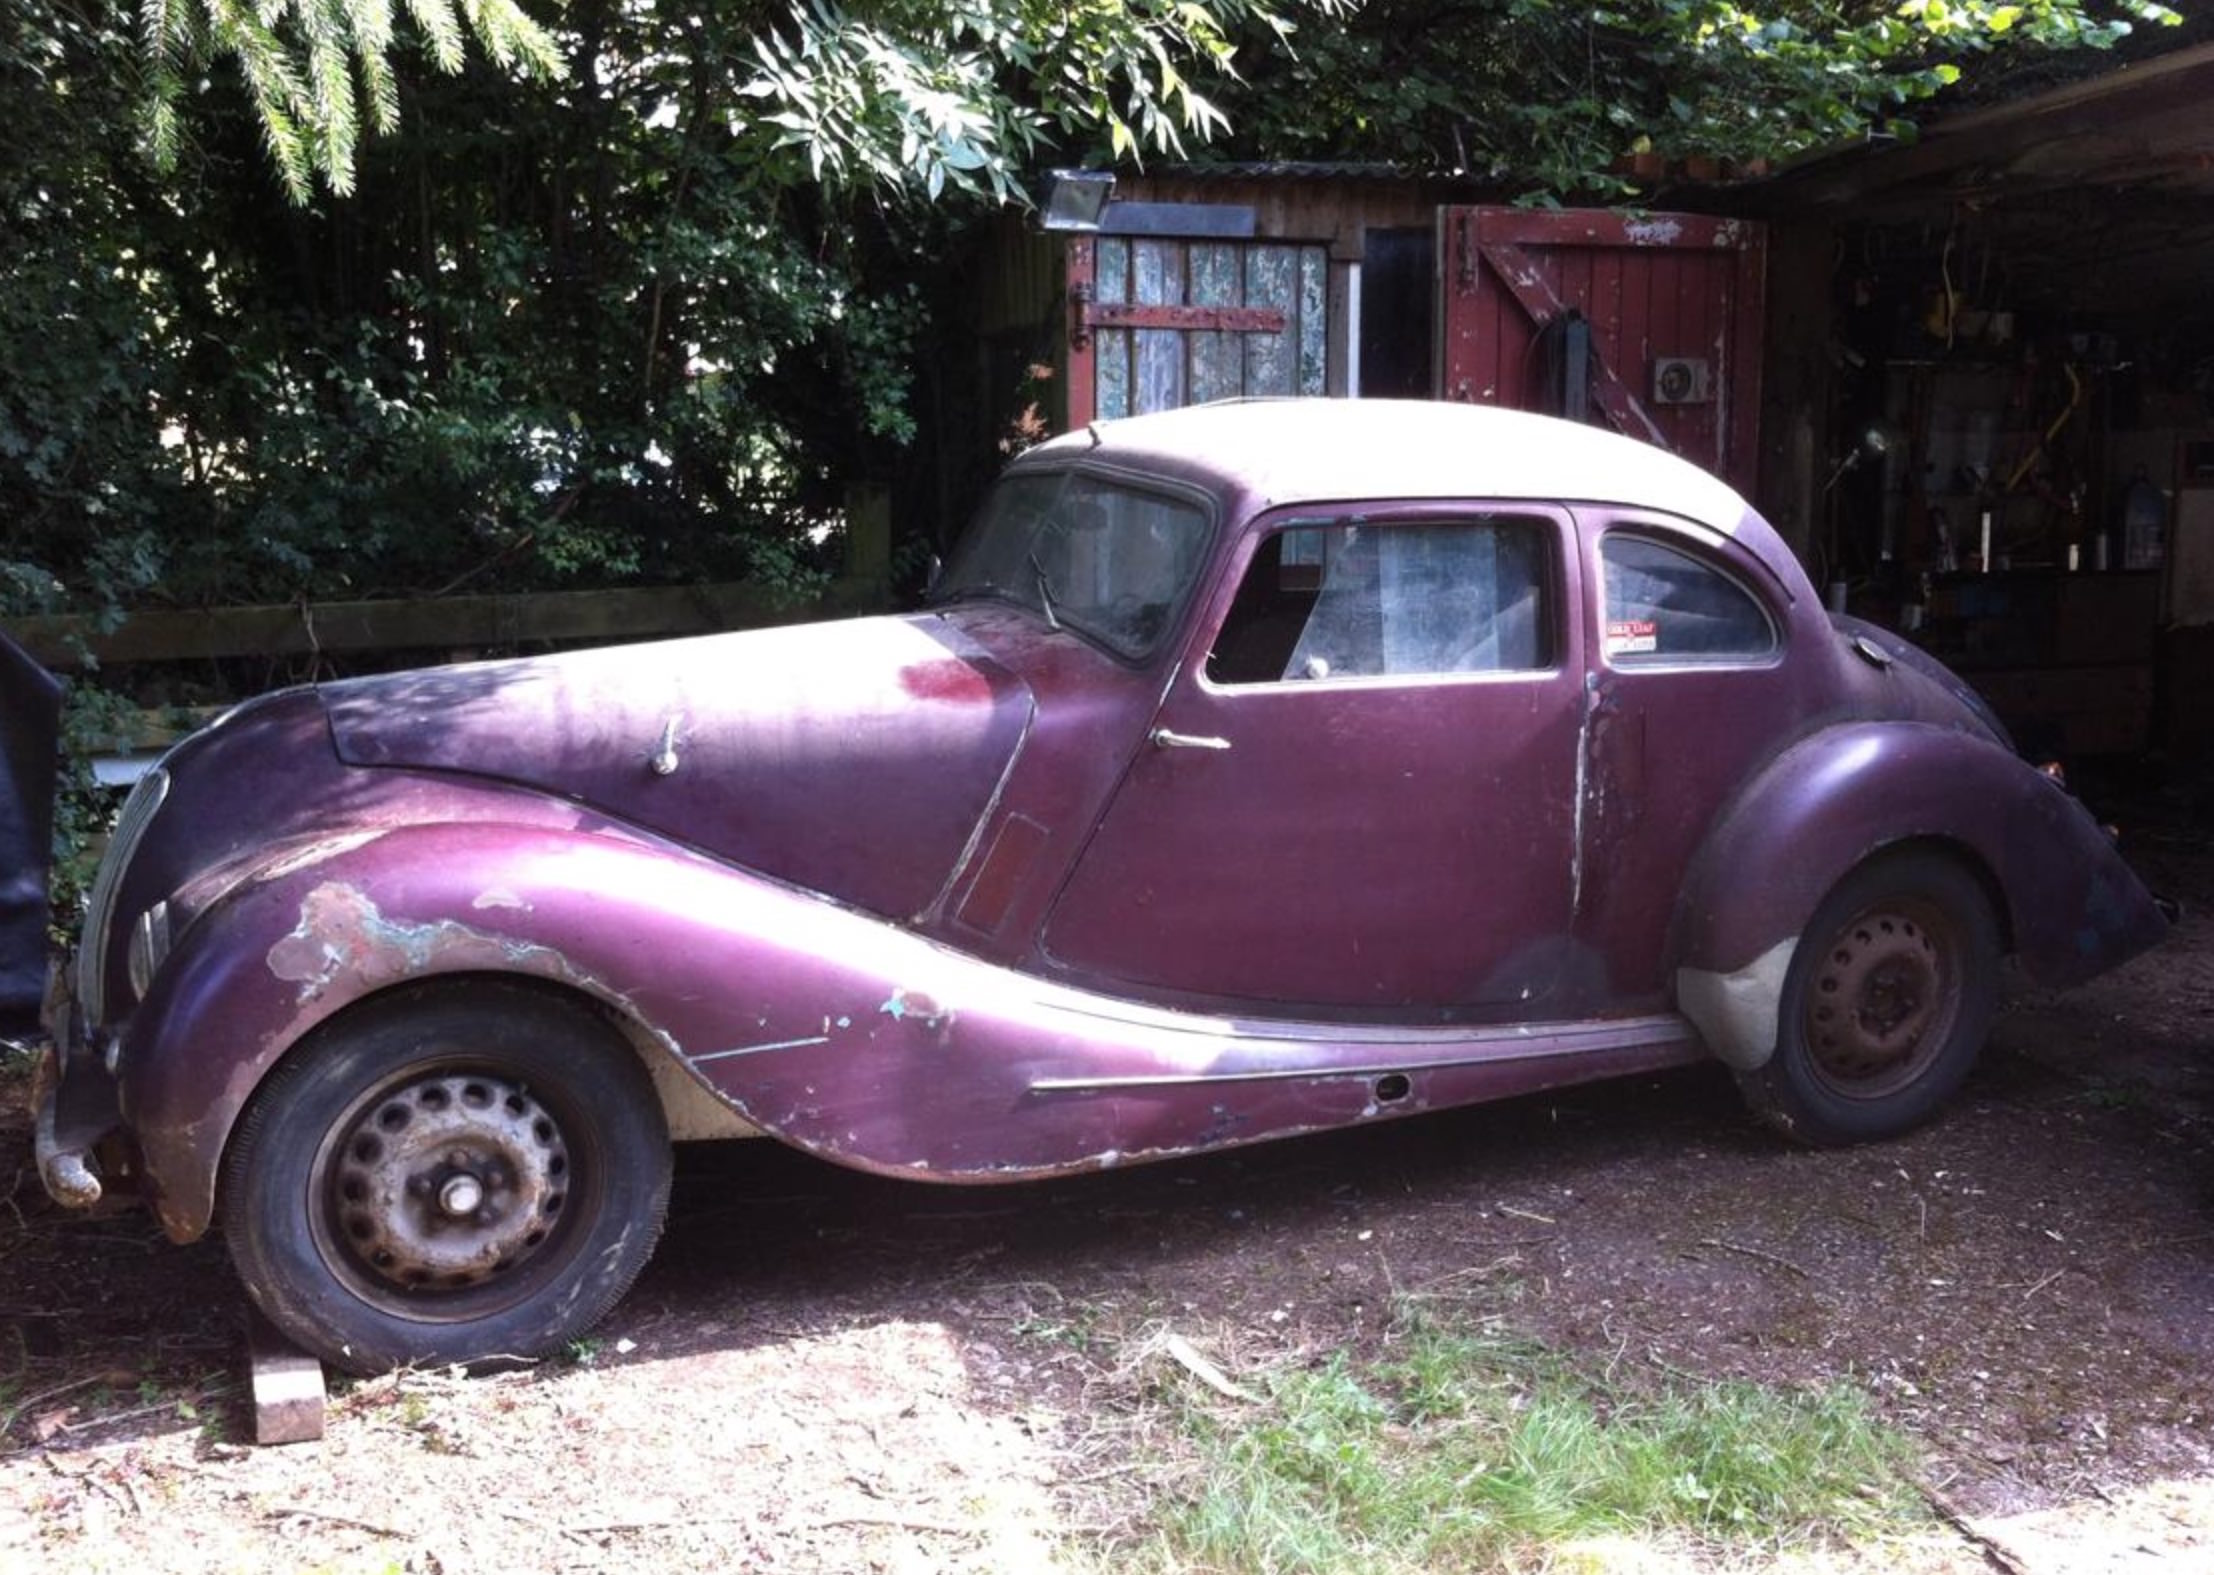 Looking for a head-turning project car? Check out this ‘garage find’ Bristol 400